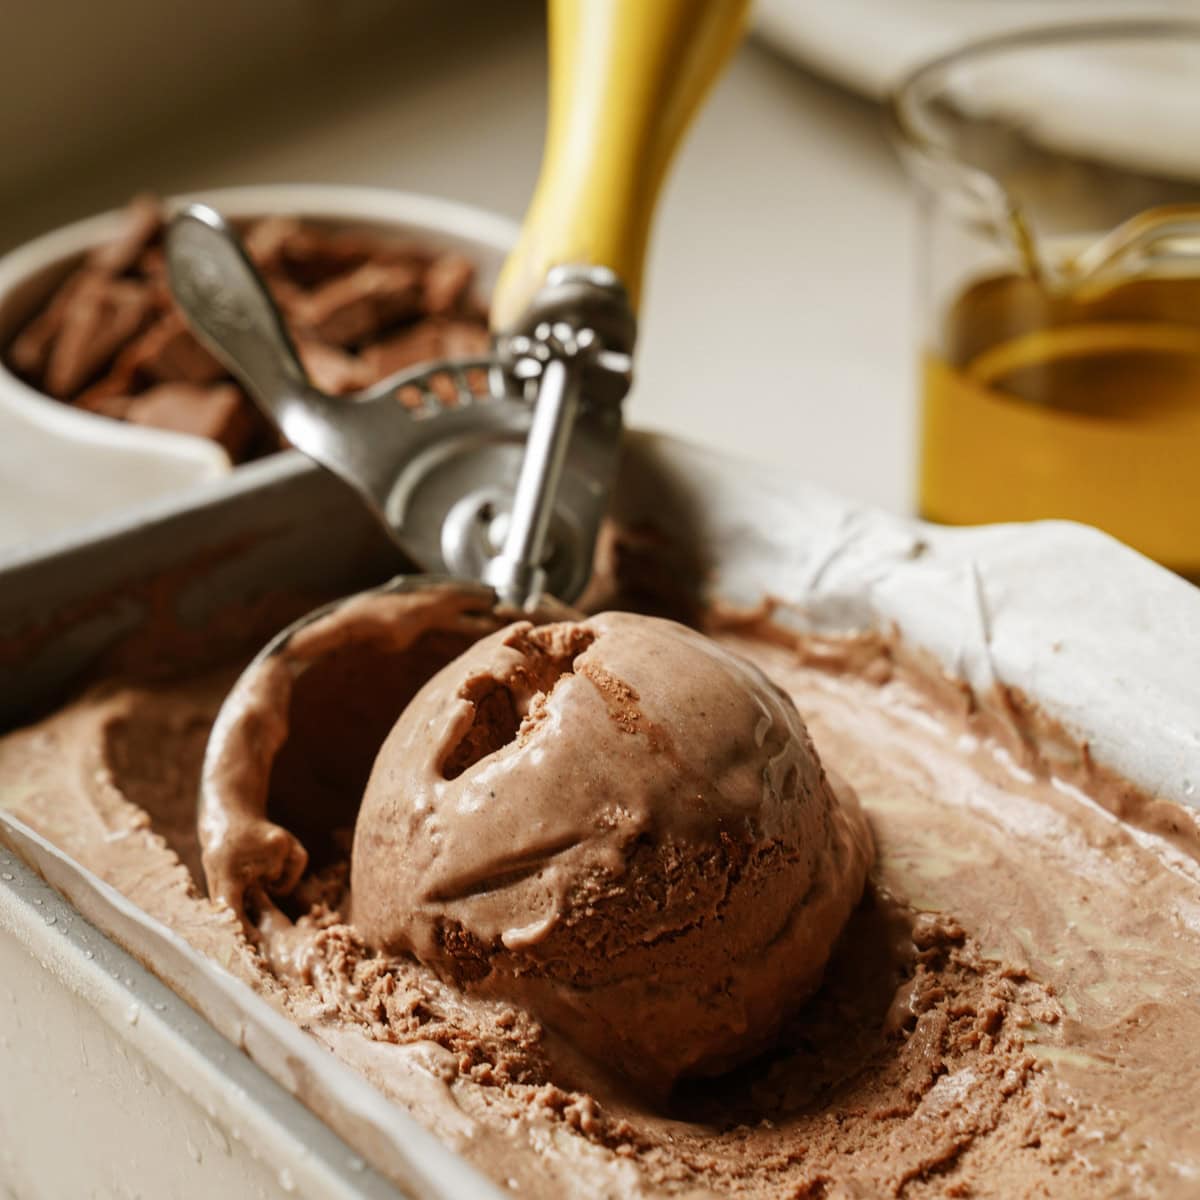 Chocolate ice cream being scooped out of container